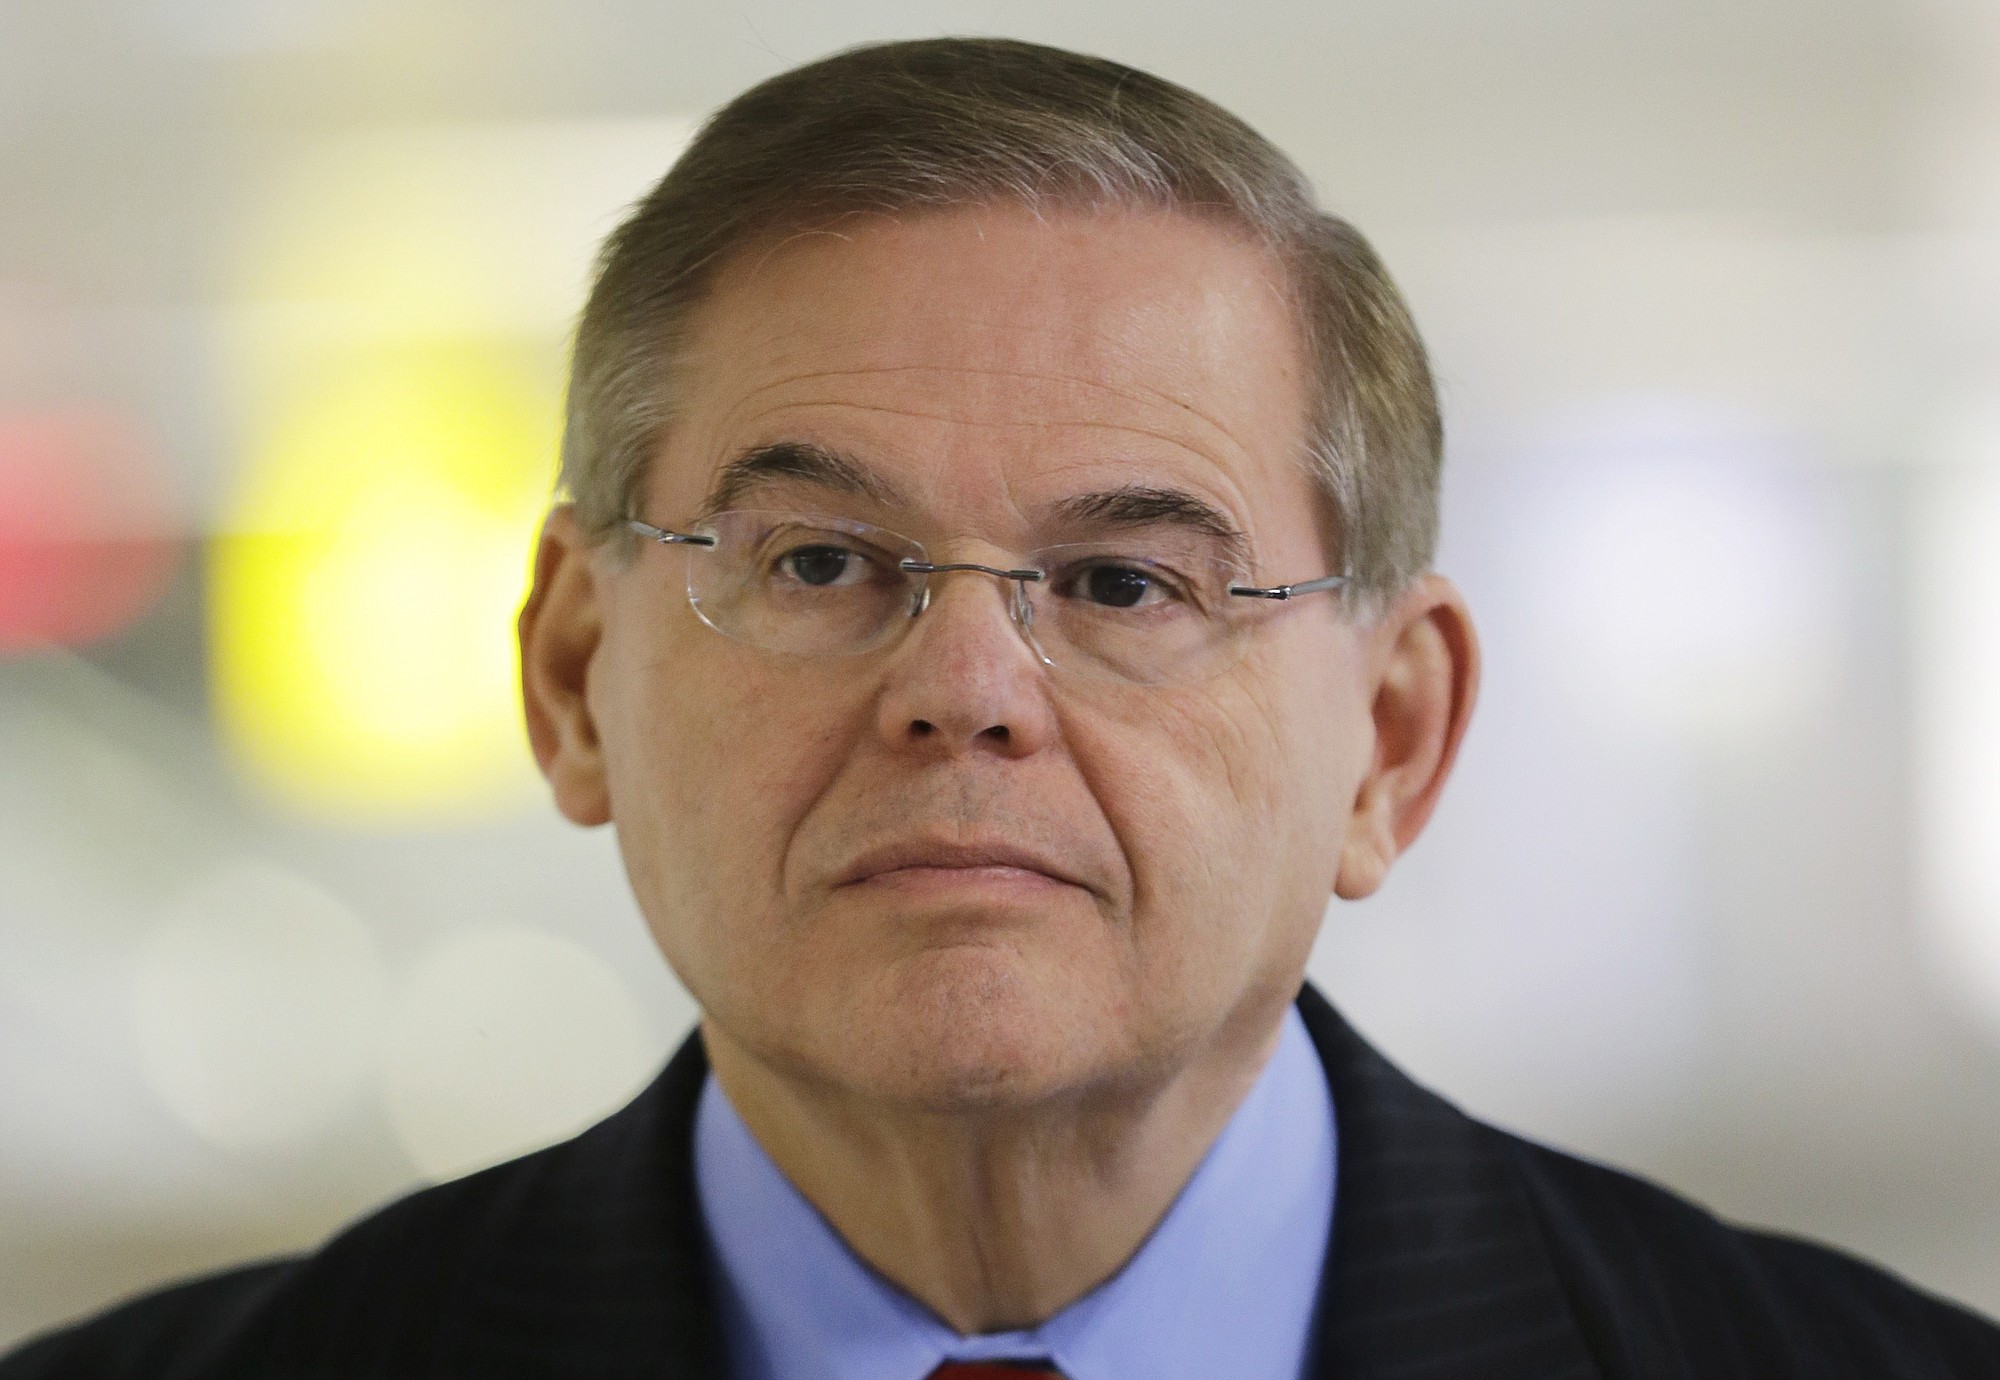 Sen. Robert Menendez, D-N.J., listens March 1, 2013, during a news conference, at Newark Liberty International Airport in Newark, N.J. Attorney General Eric Holder is declining to say if he has approved the filing of corruption charges against Menendez.